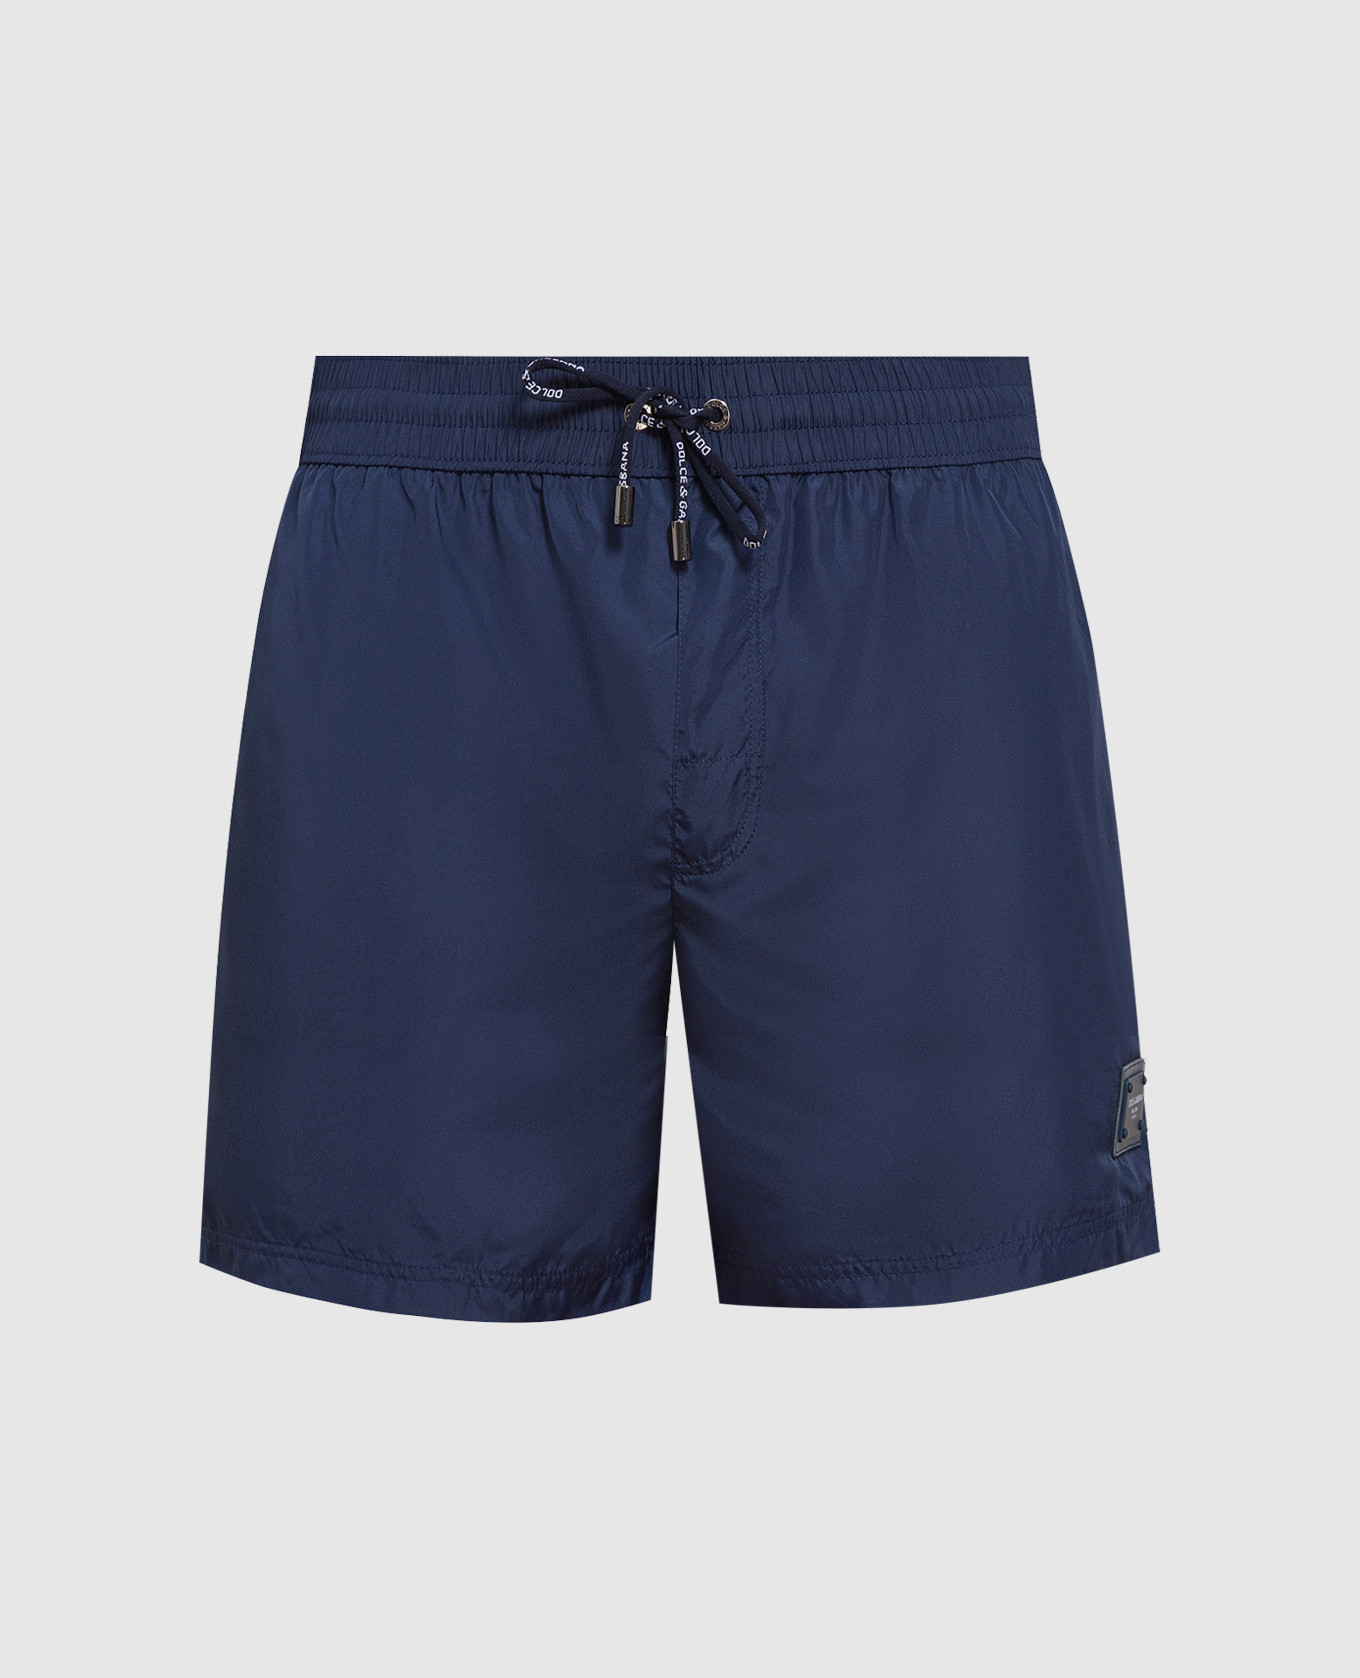 Blue swimming shorts with logo